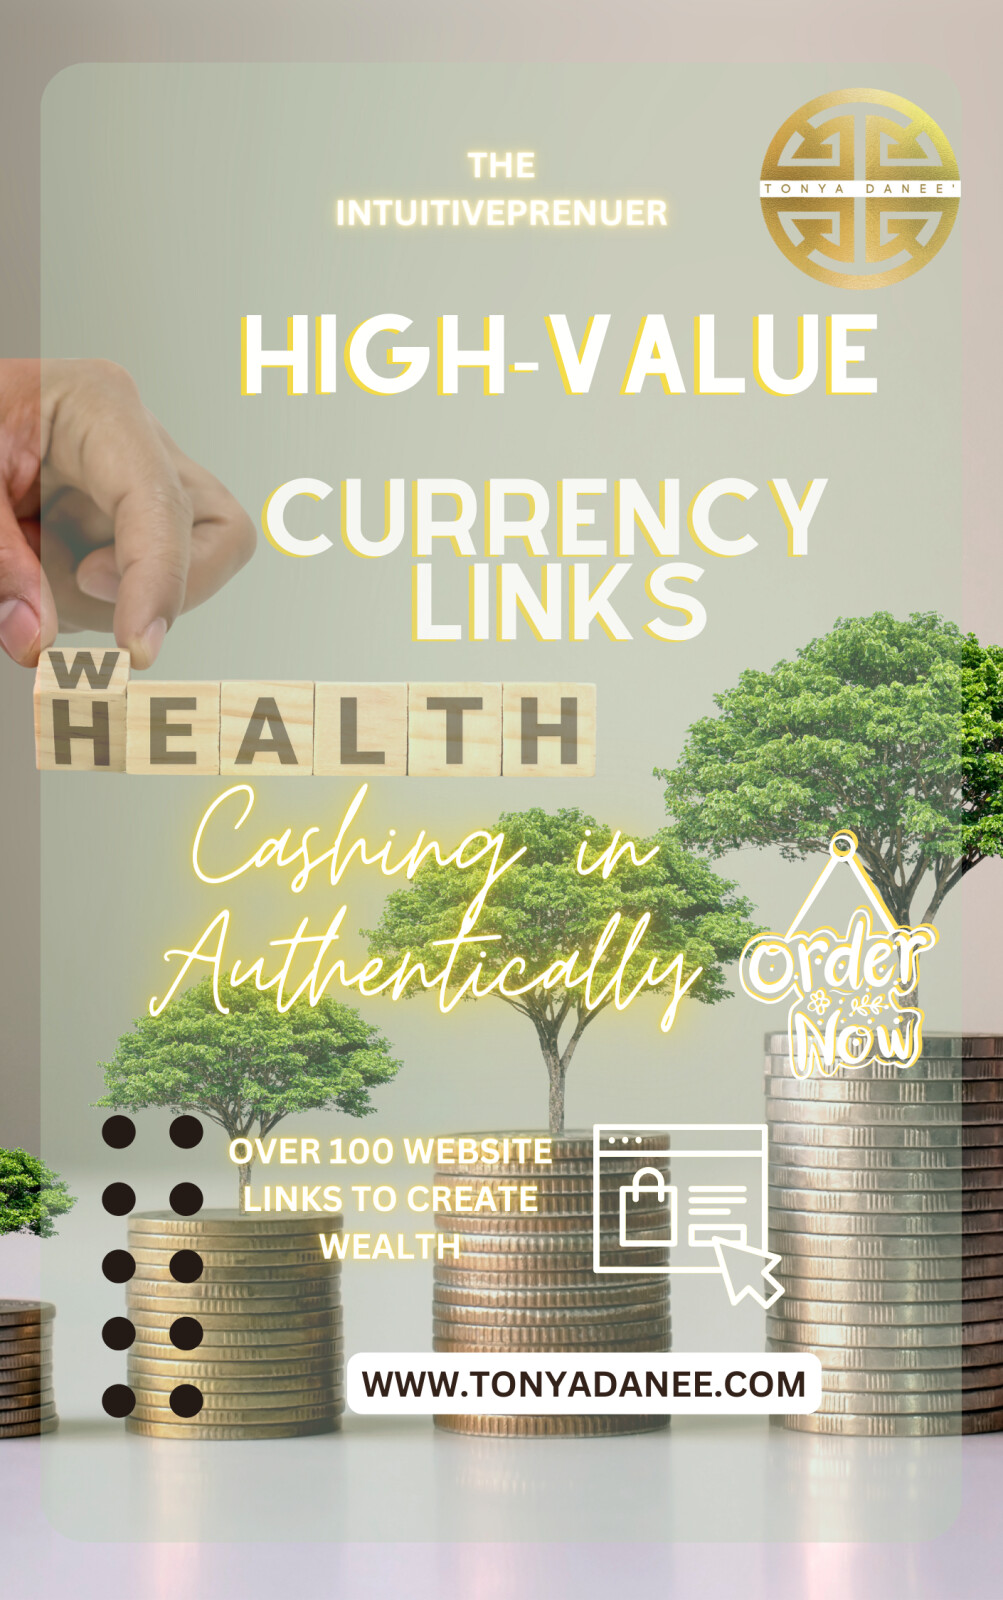 ARE YOU LOOKING TO CASH IN AUTHENTICALLY? High-Value: Currency Links